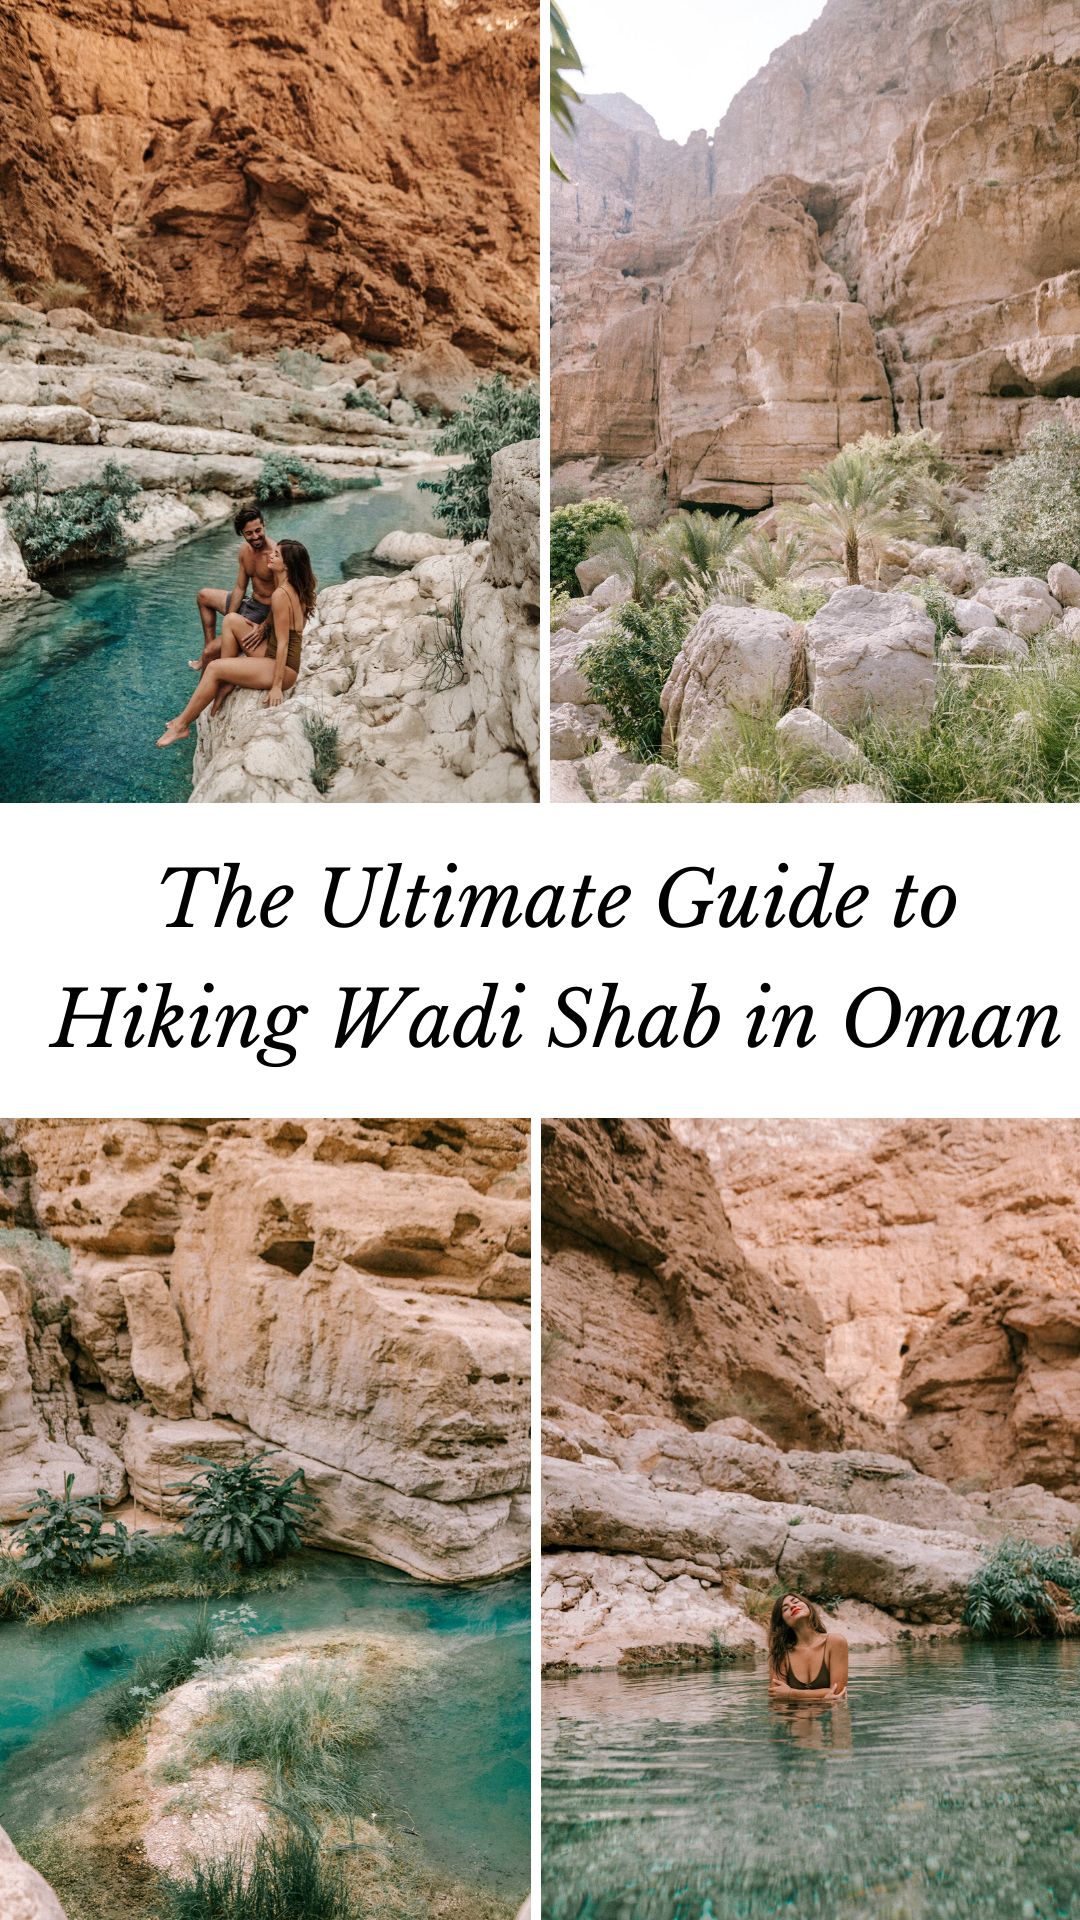 For an adventure in Oman, hike into Wadi Shab. Click here for the ultimate guide to the best hike in Oman! #oman #middleeast #travel | Oman Wadi Shab | Wadi Shab in Oman | Wadi Shab Oman hike | Oman things to do in | Oman photography | Oman travel outfits | Oman travel woman | Oman travel destinations | Oman travel guide | Oman travel adventure | tips for travel to Oman | best places to travel in the Middle East | Oman travel tips | Oman travel photography | Middle East travel tips
